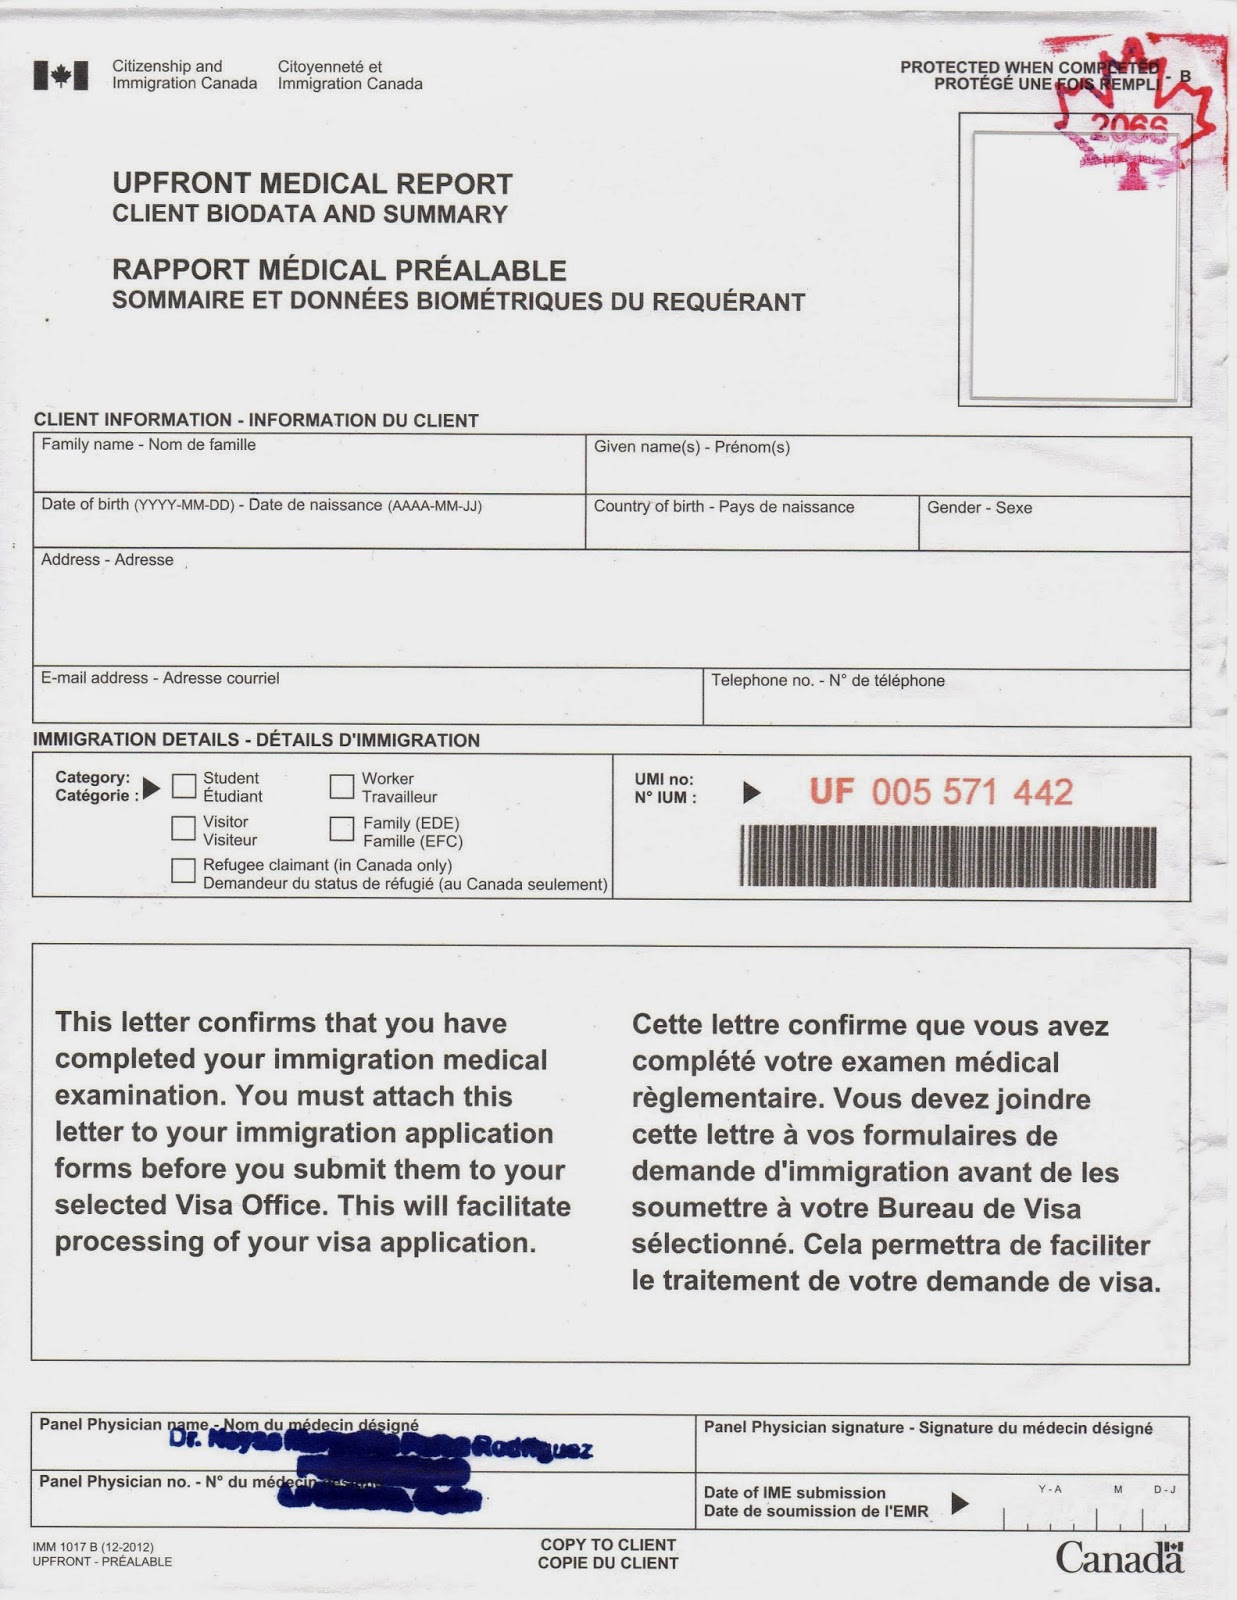 Proof of medical examination Medical Report Client